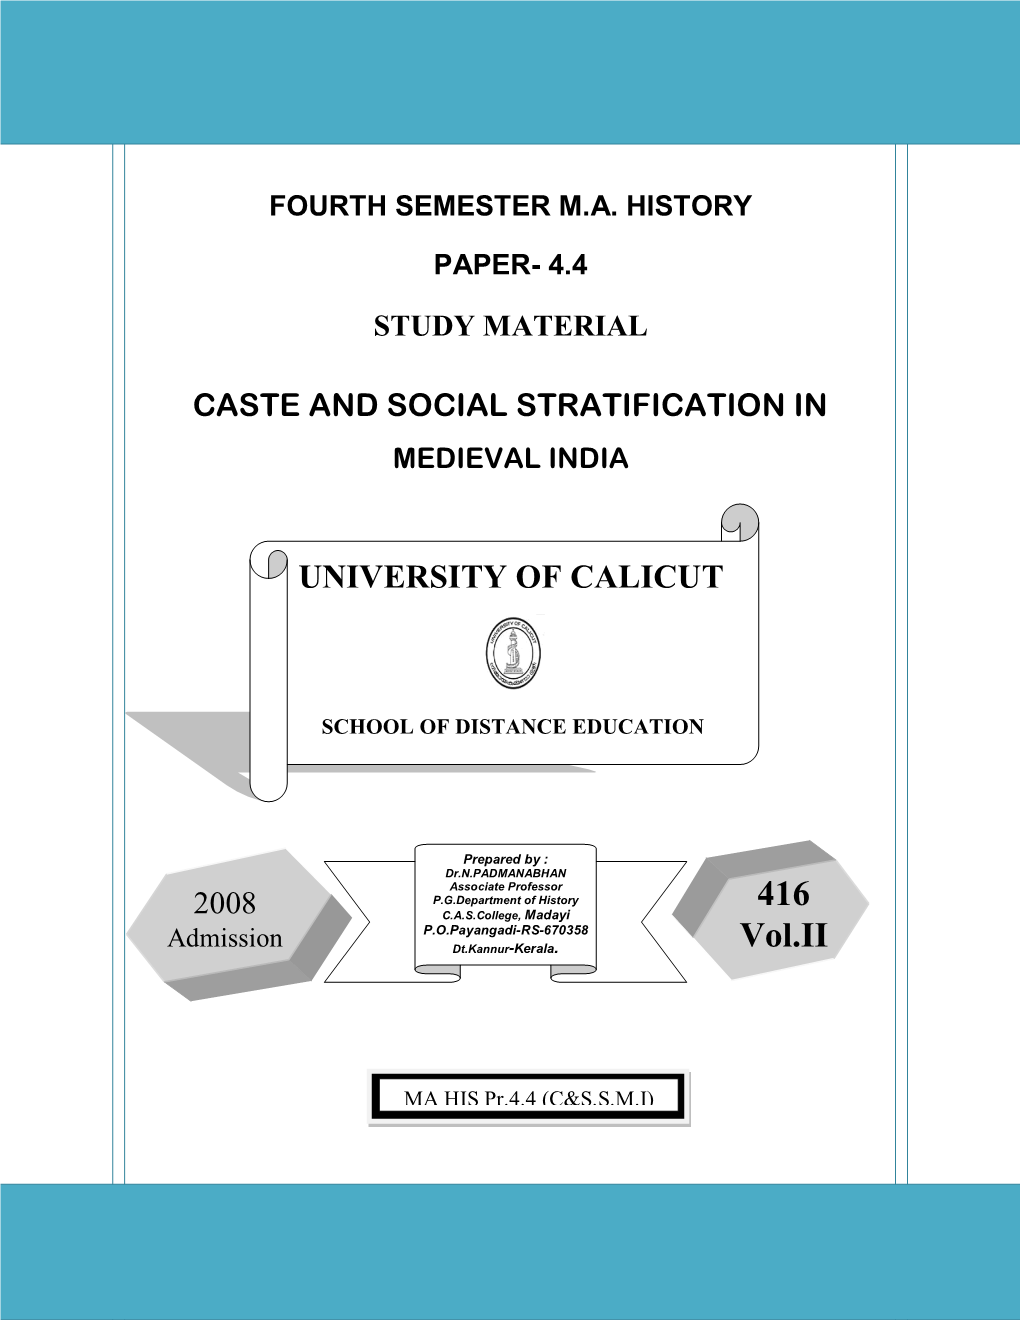 Caste and Social Stratification in Medieval India